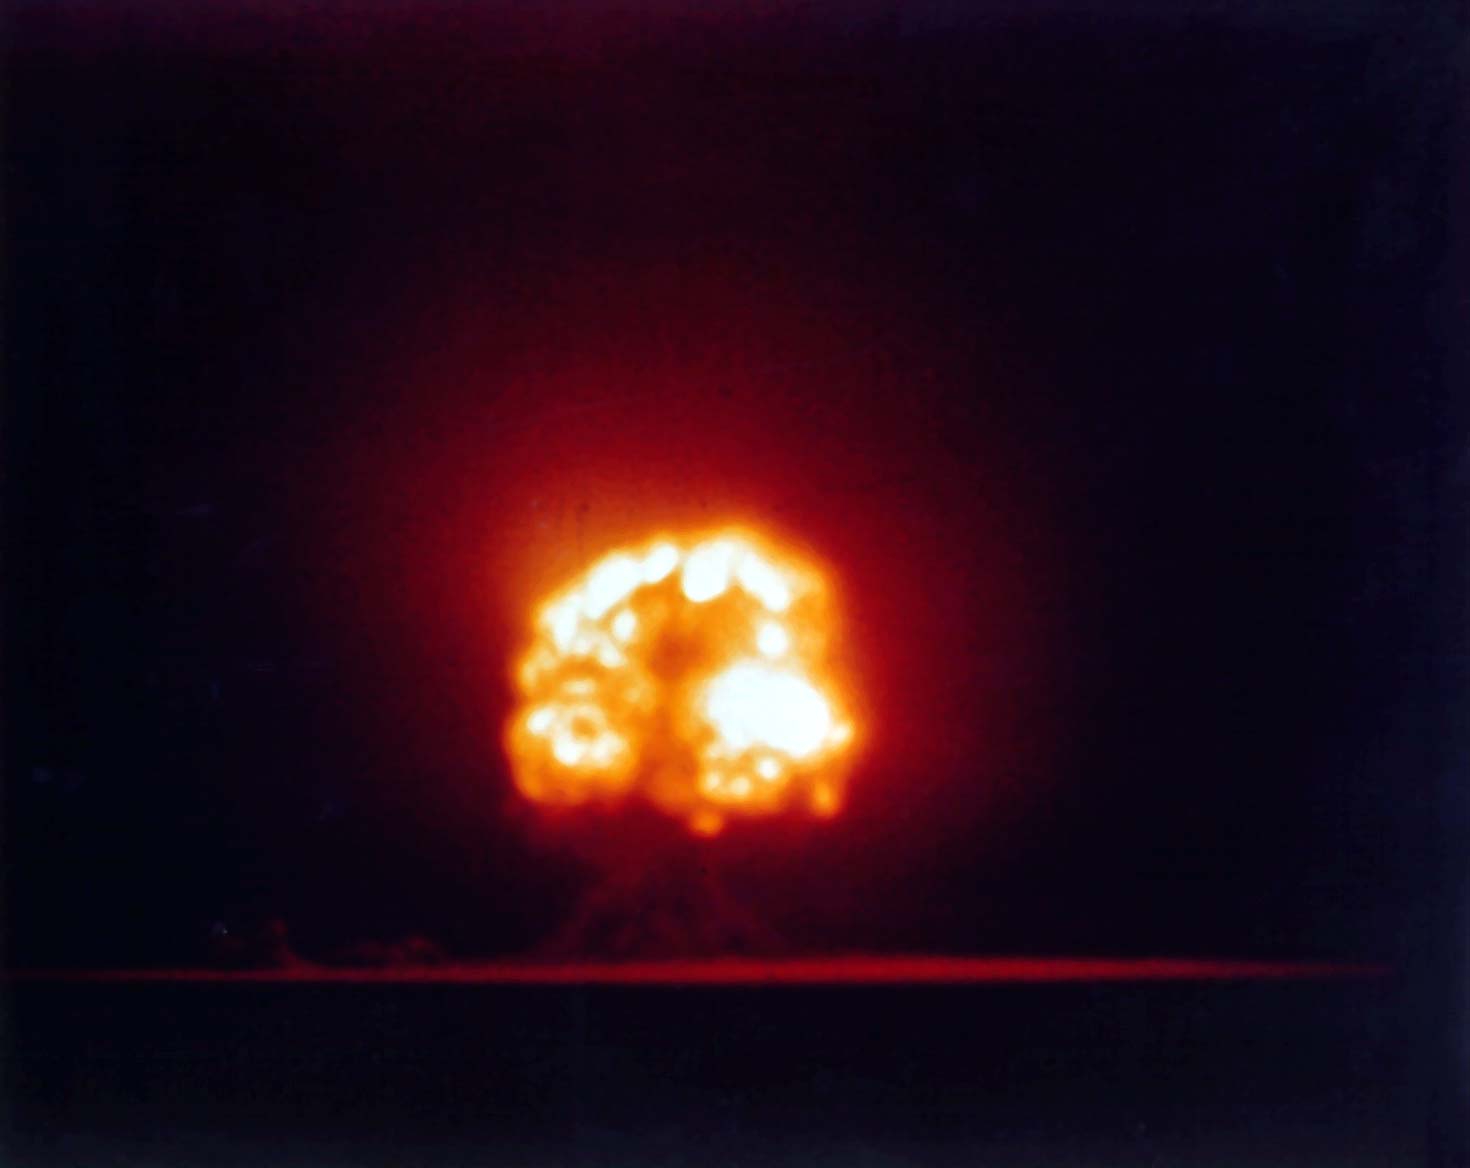 TRINITY
TRINITY The First Nuclear Test ever conducted. A 19 kiloton tower shot was exploded July 16, 1945 in New Mexico.
